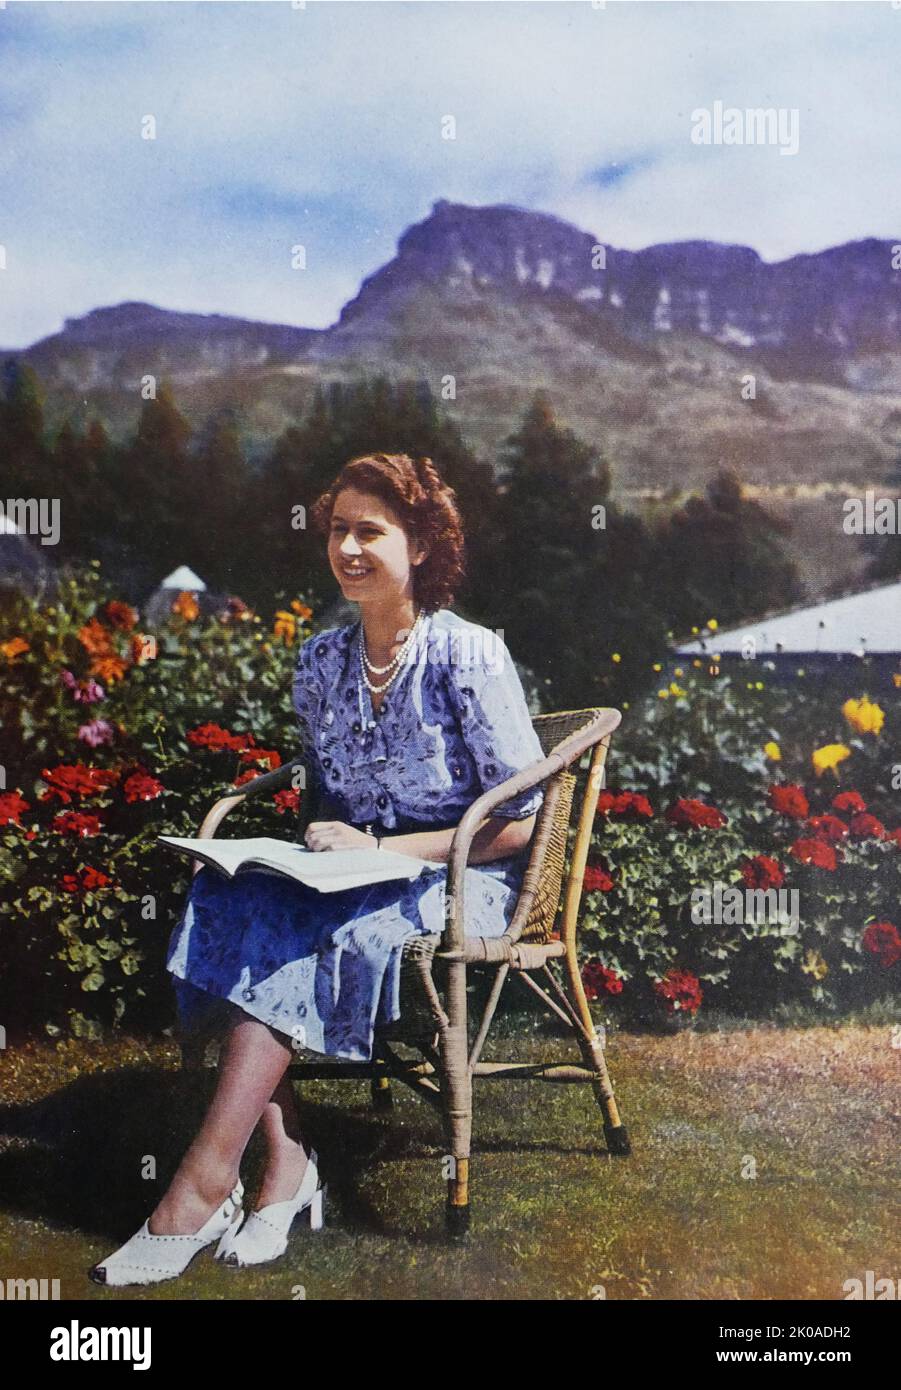 Princess Elizabeth, (later Queen Elizabeth II), of England, on her tour of South Africa, 1947 Stock Photo